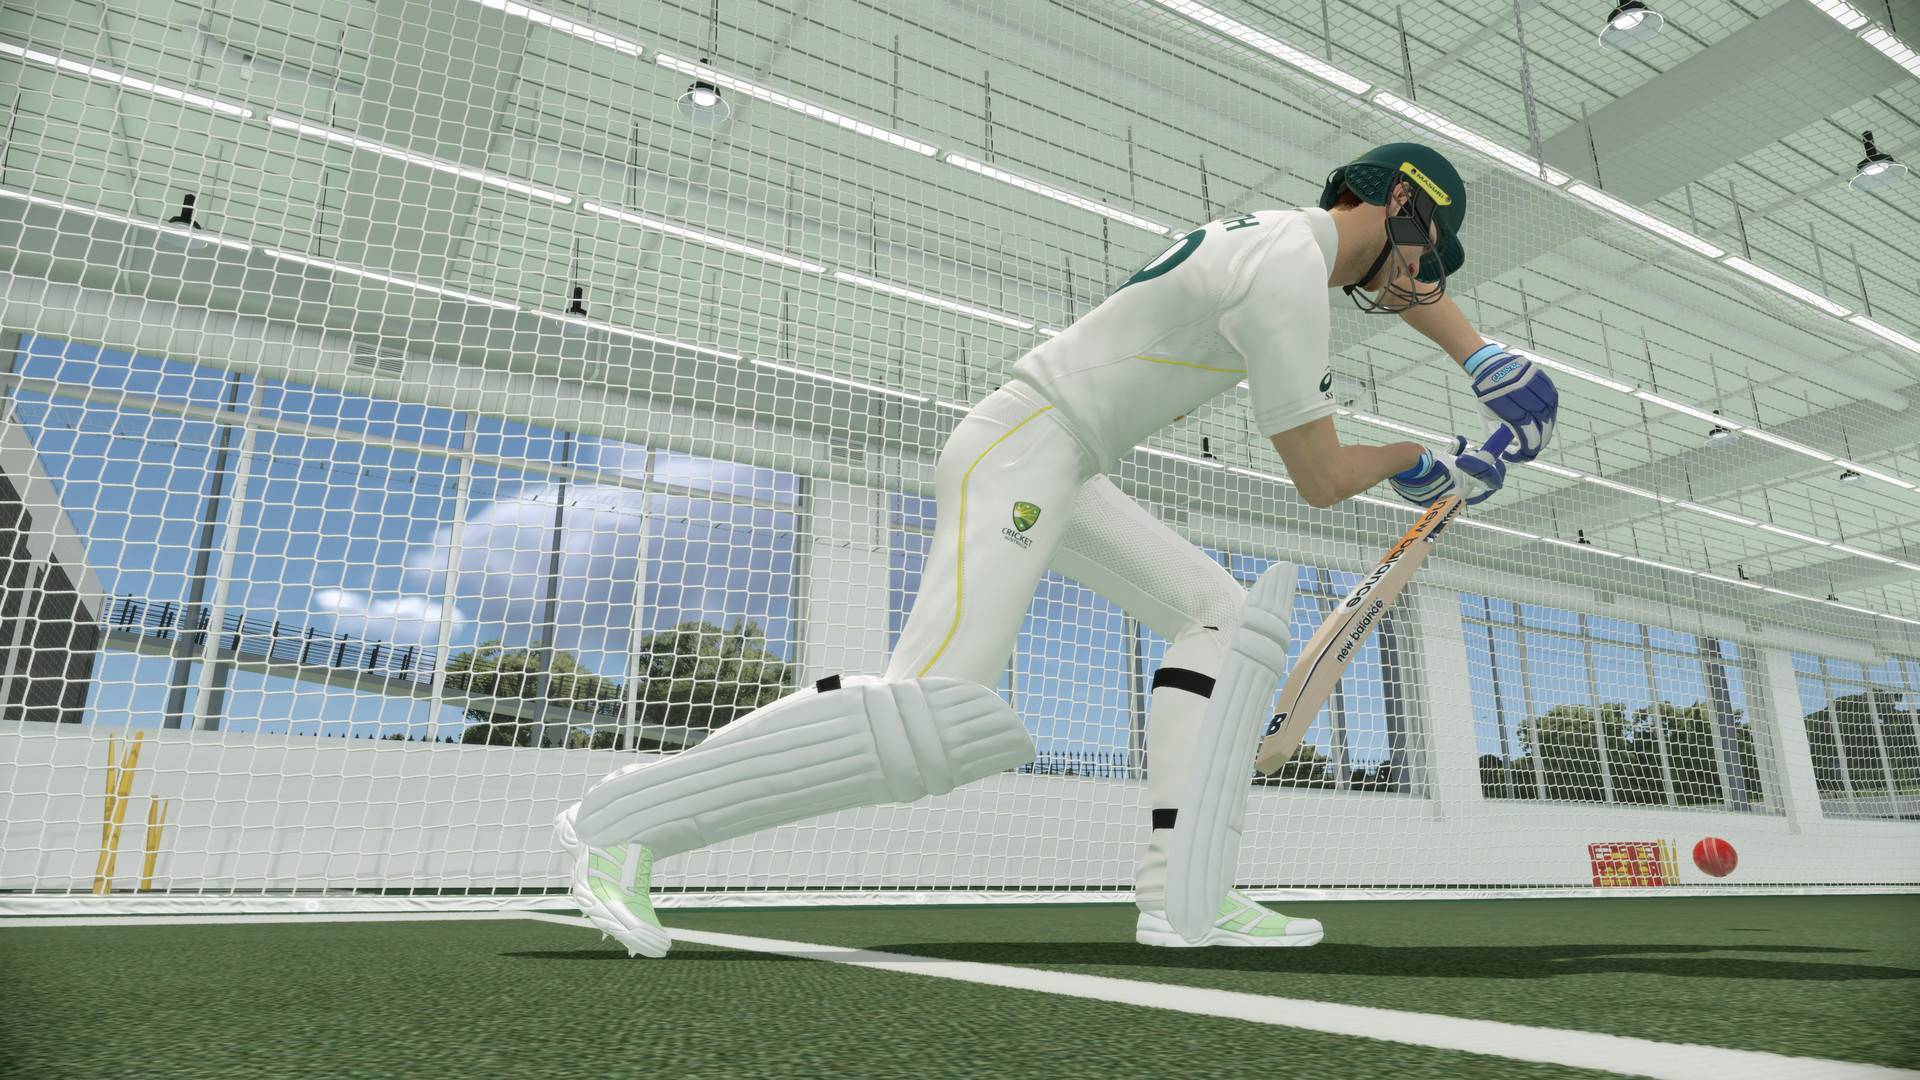 Cricket 22 (PS4) cheap - Price of